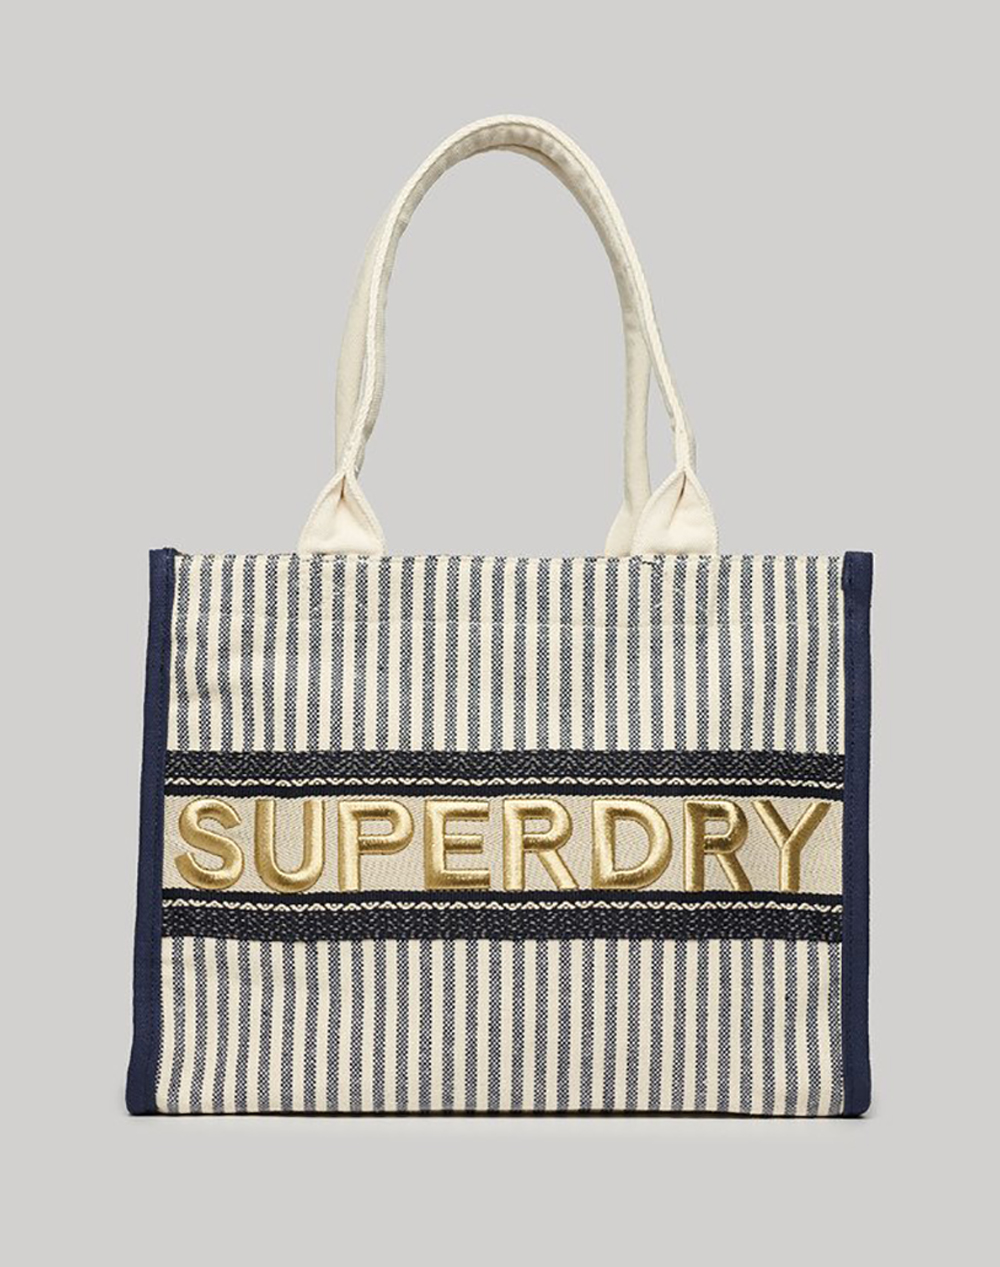 SUPERDRY D2 SDRY LUXE TOTE BAG ΤΣΑΝΤΑ ΓΥΝΑΙΚΕΙΟ (Διαστάσεις: 32 x 38 x 15 εκ) W9110381A-JKC NavyBlue 3810ASUPE6220006_90672